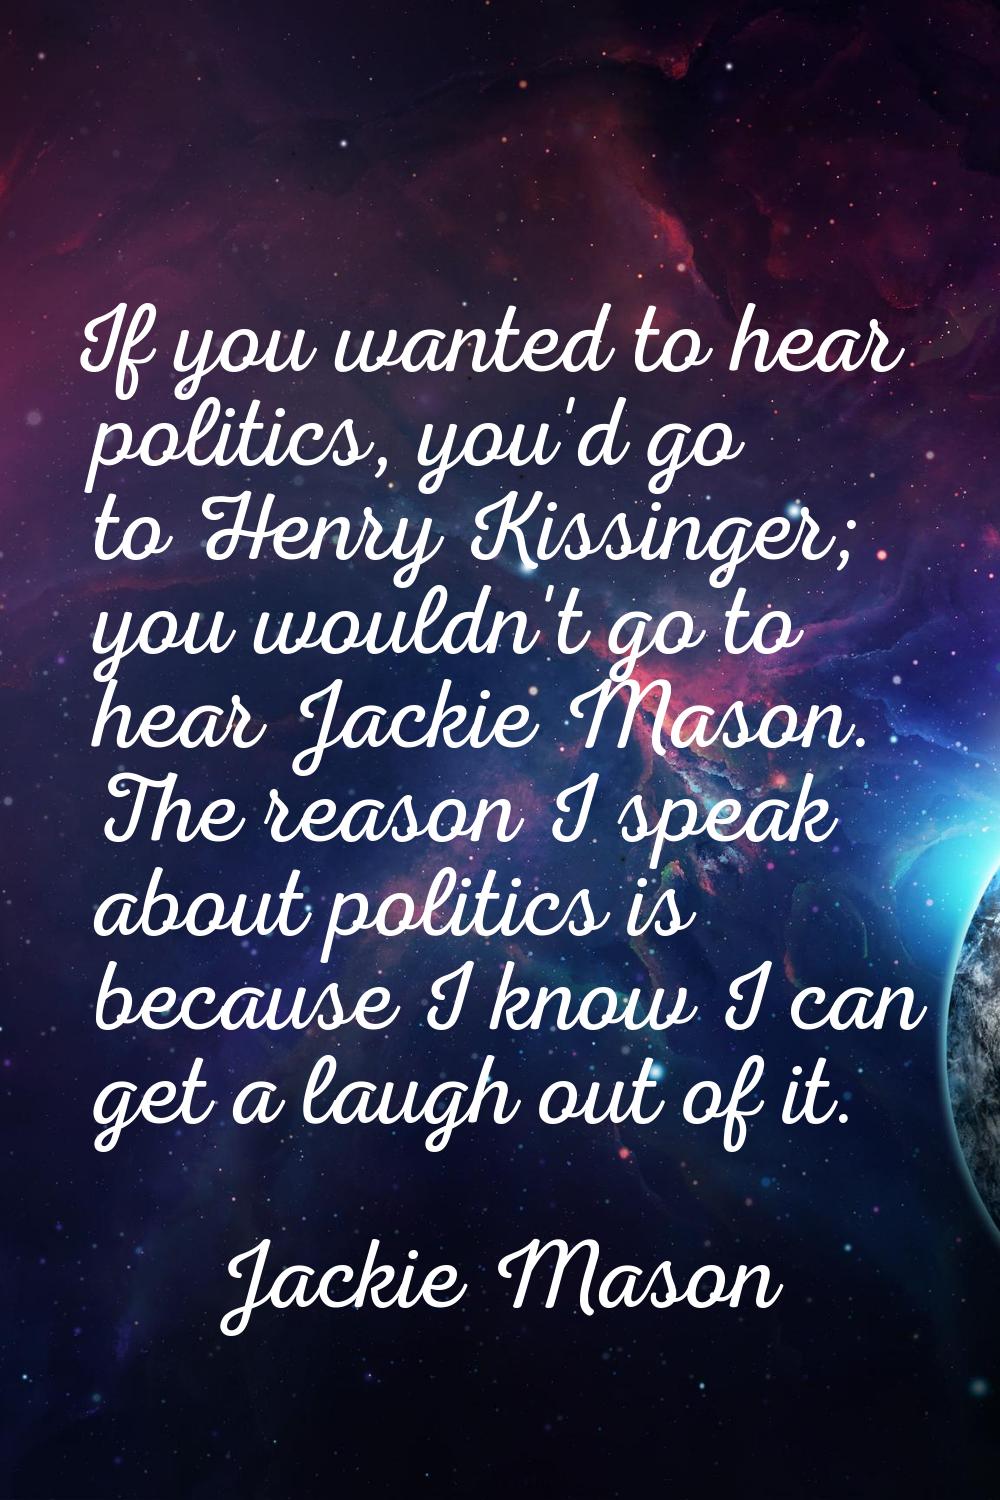 If you wanted to hear politics, you'd go to Henry Kissinger; you wouldn't go to hear Jackie Mason. 